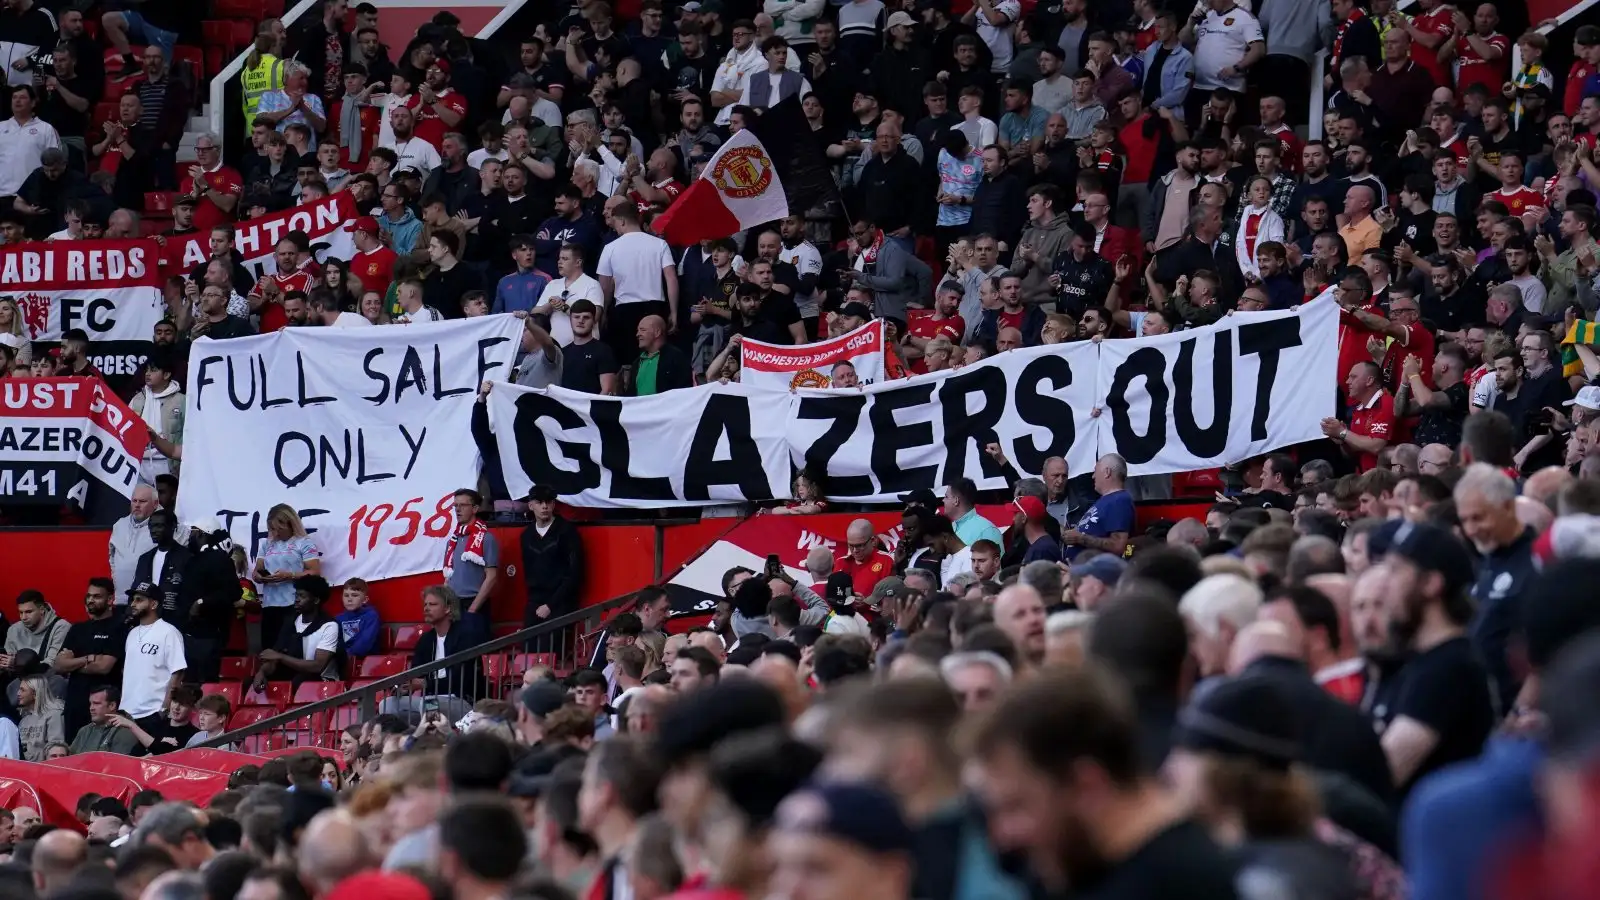 Manchester United protest against the Glazers' ownership.